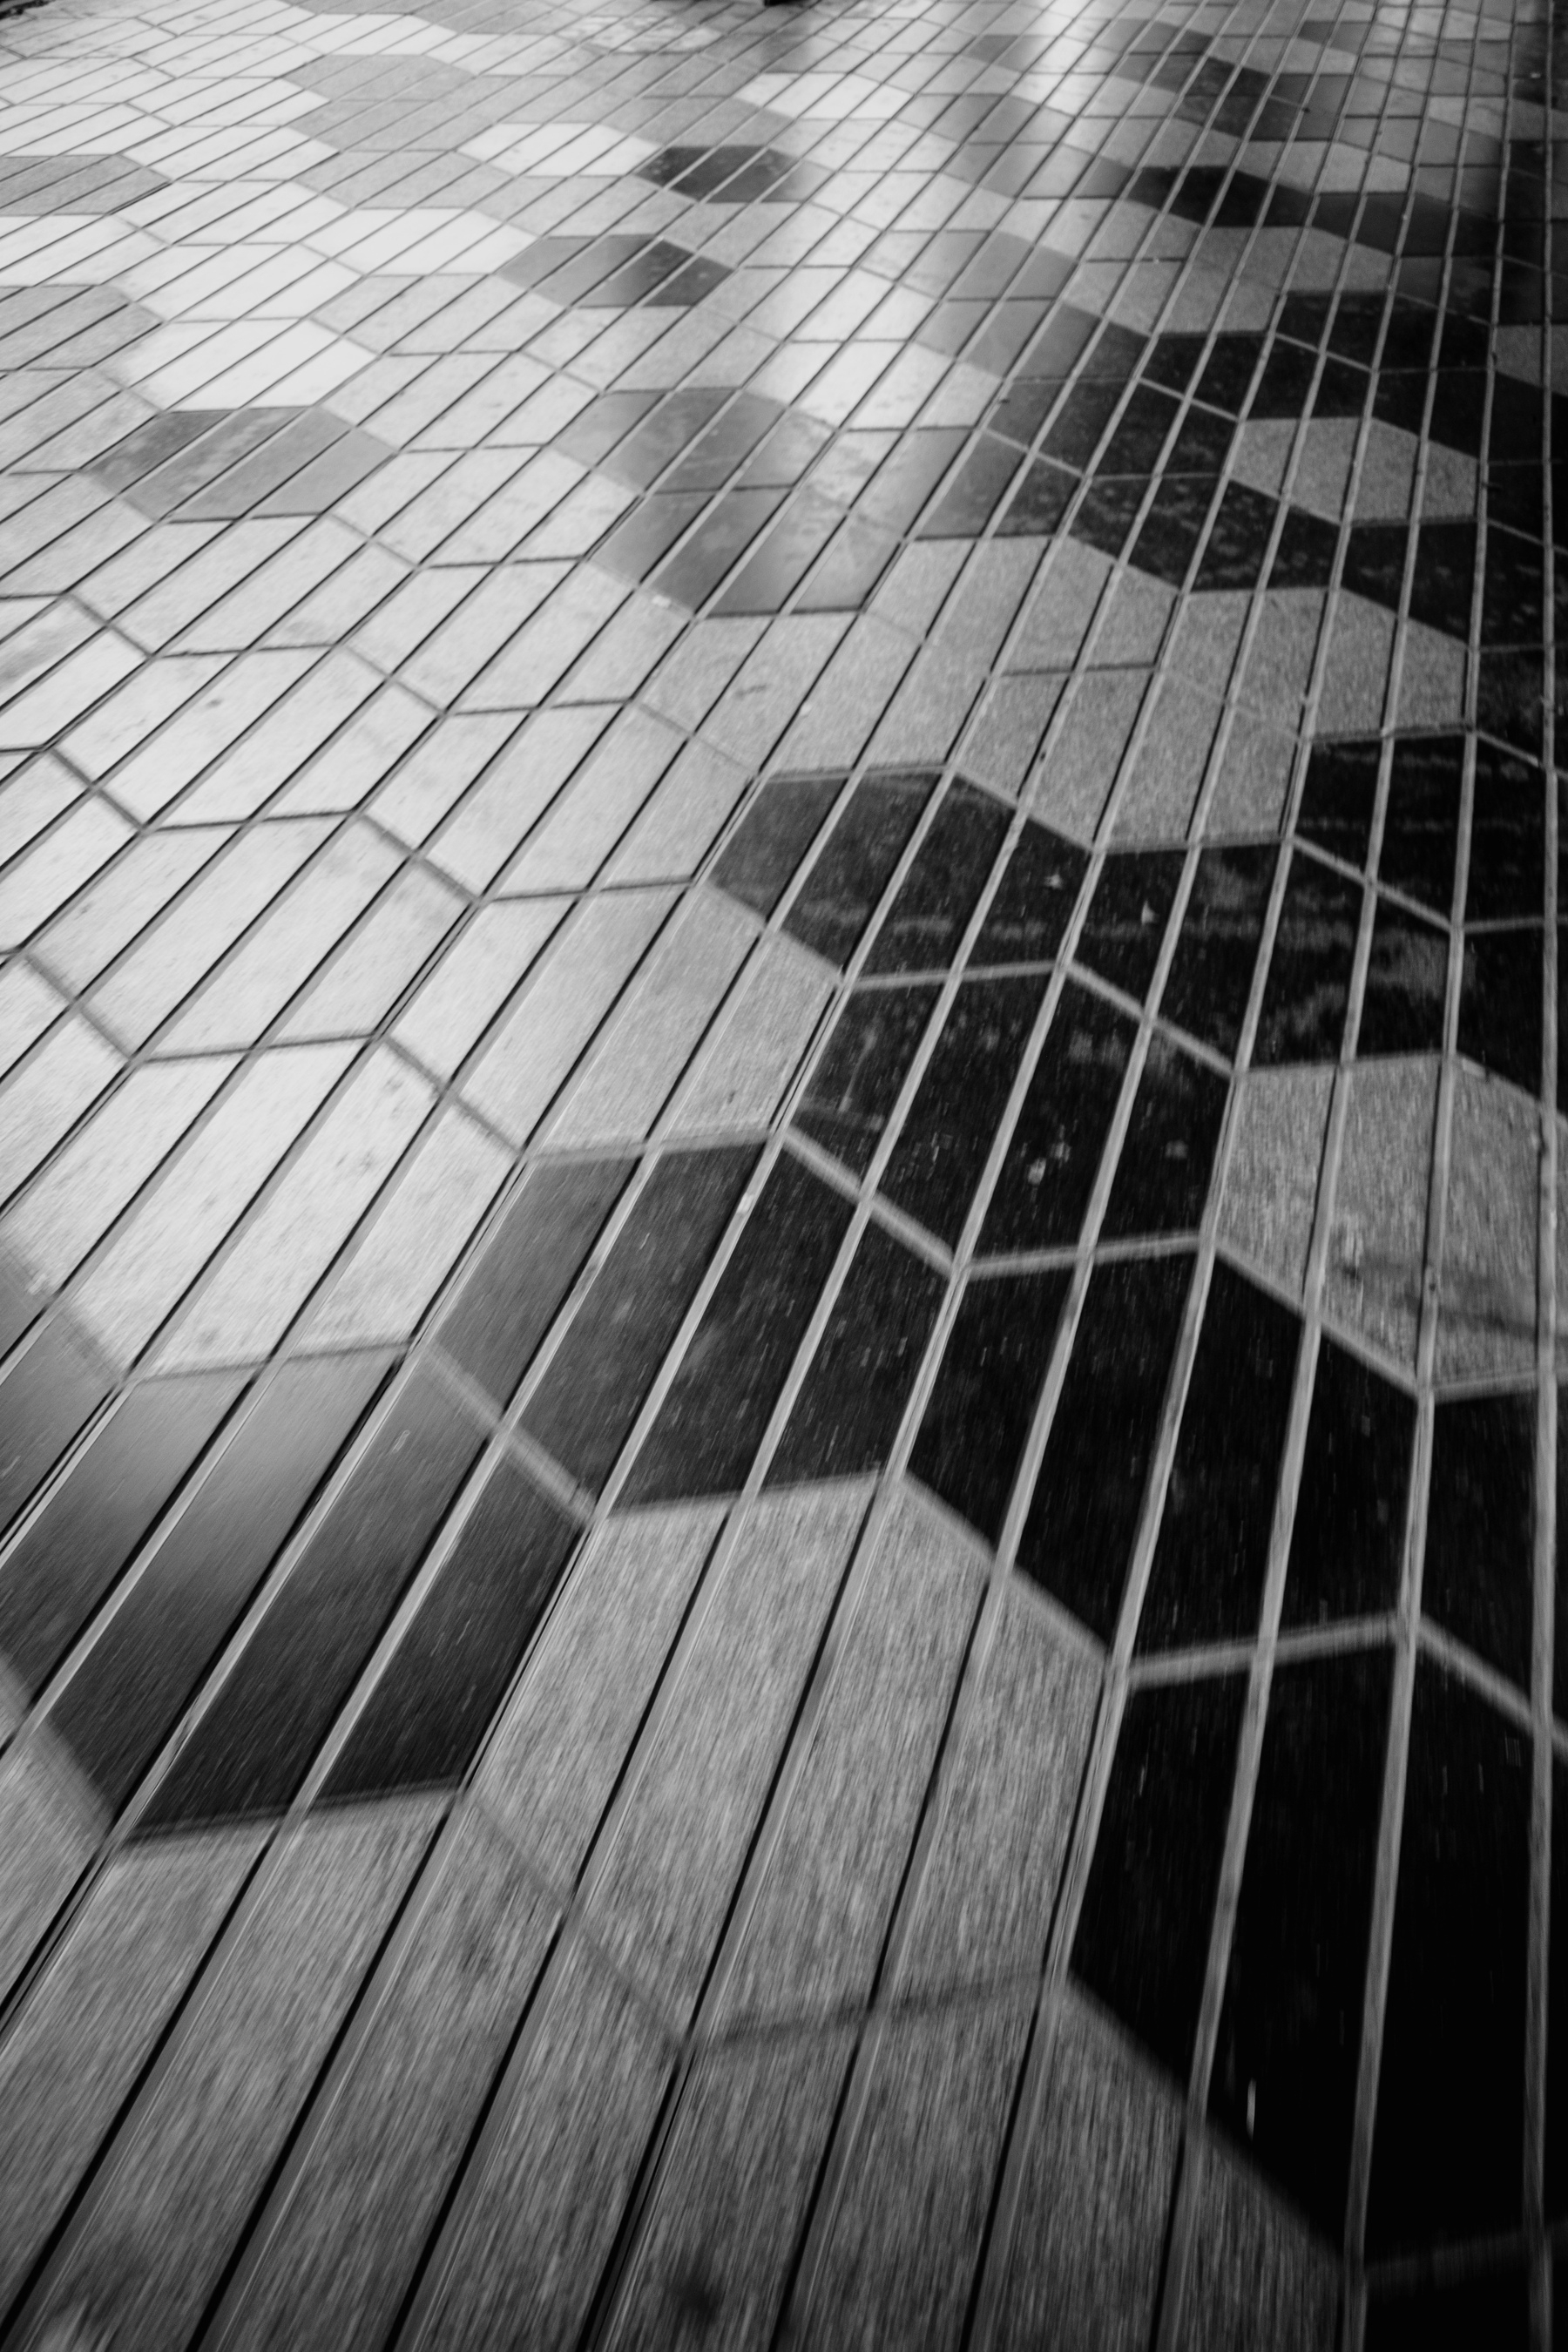 A black and white, patterned tiled floor with a geometric design consisting of hexagons and parallelograms.